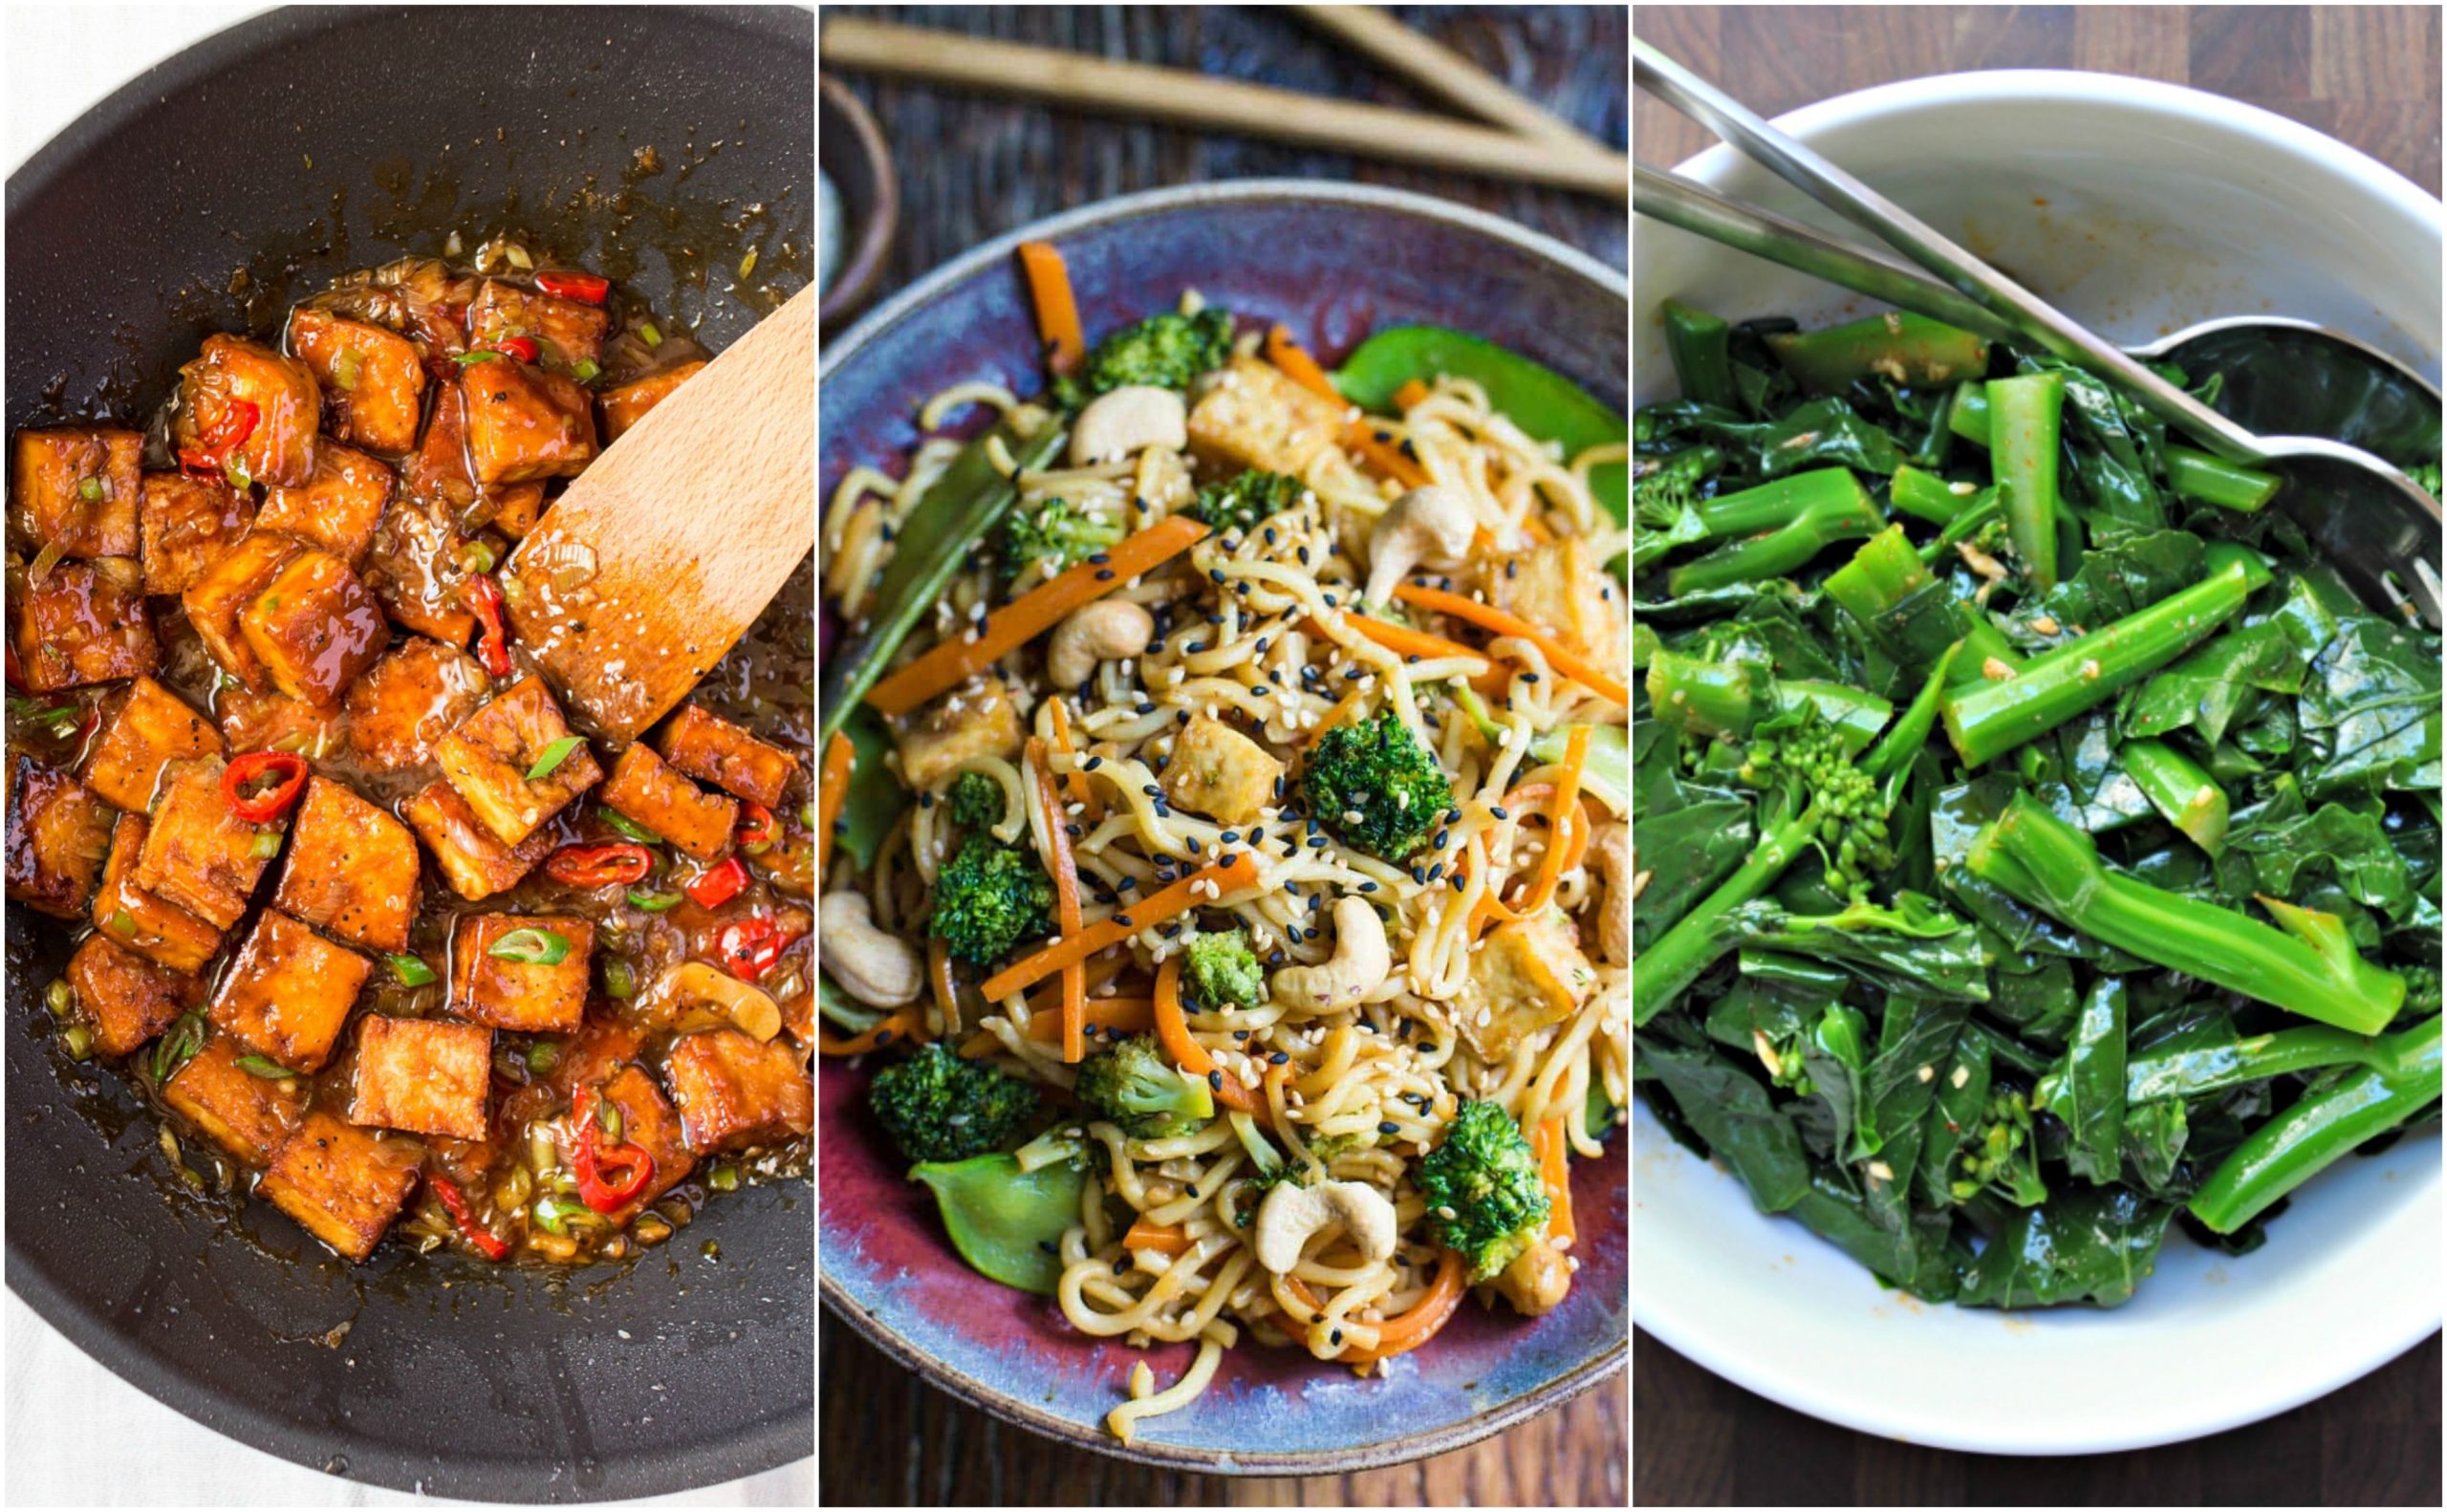 Satisfy Your Cravings with Delicious Asian Vegetarian Snack Recipes